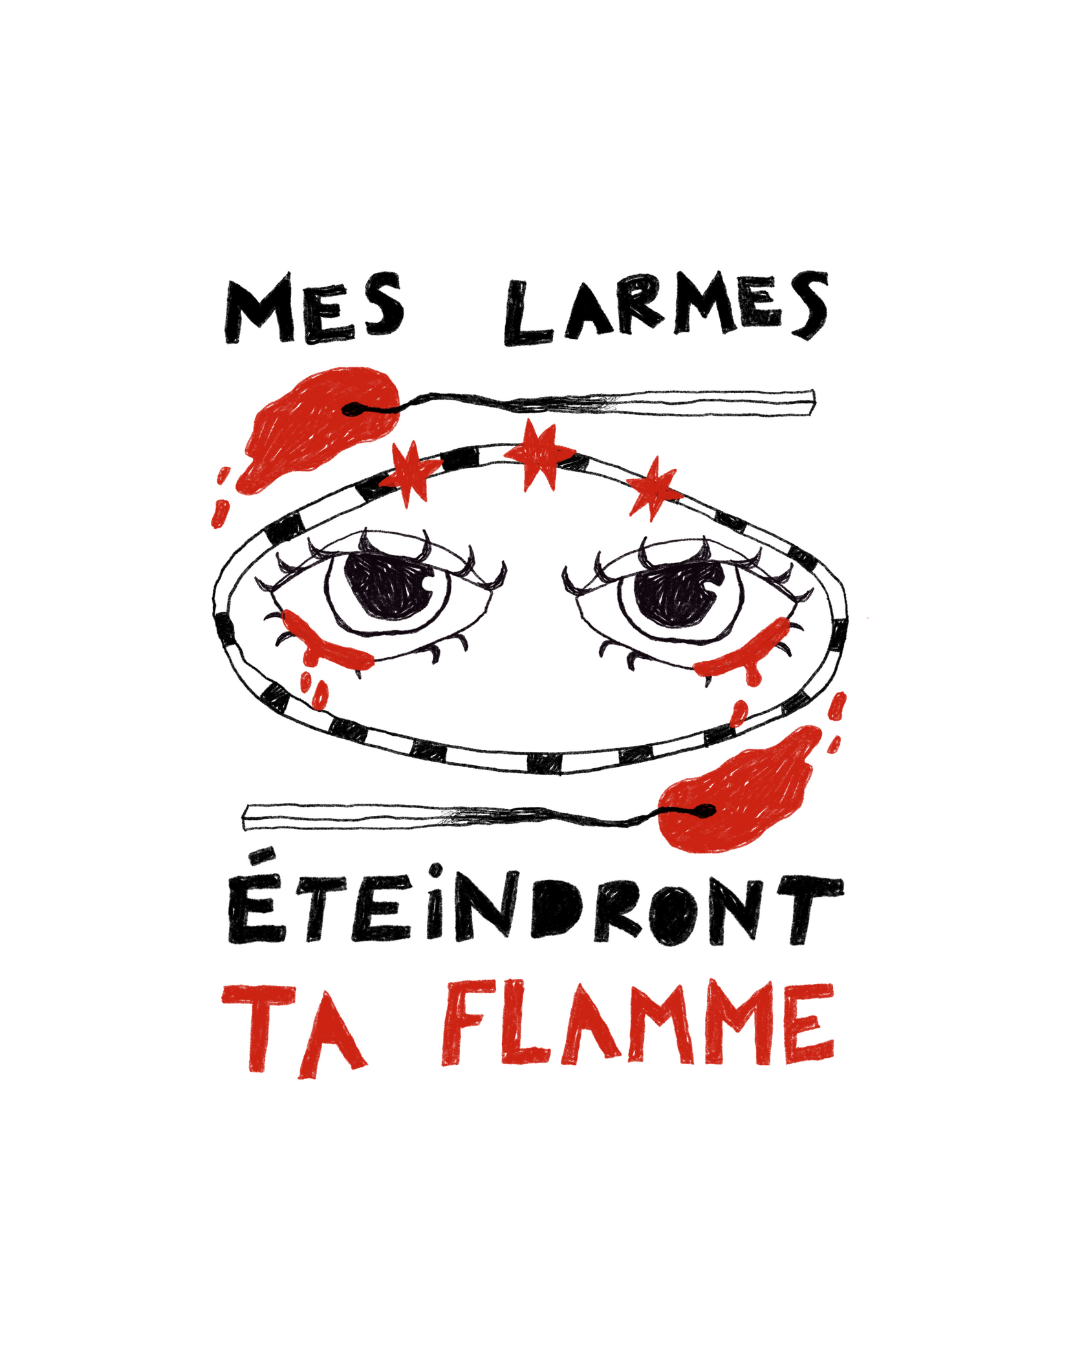 Hoodie freeedom cotton white mes larmes éteindront ta flamme